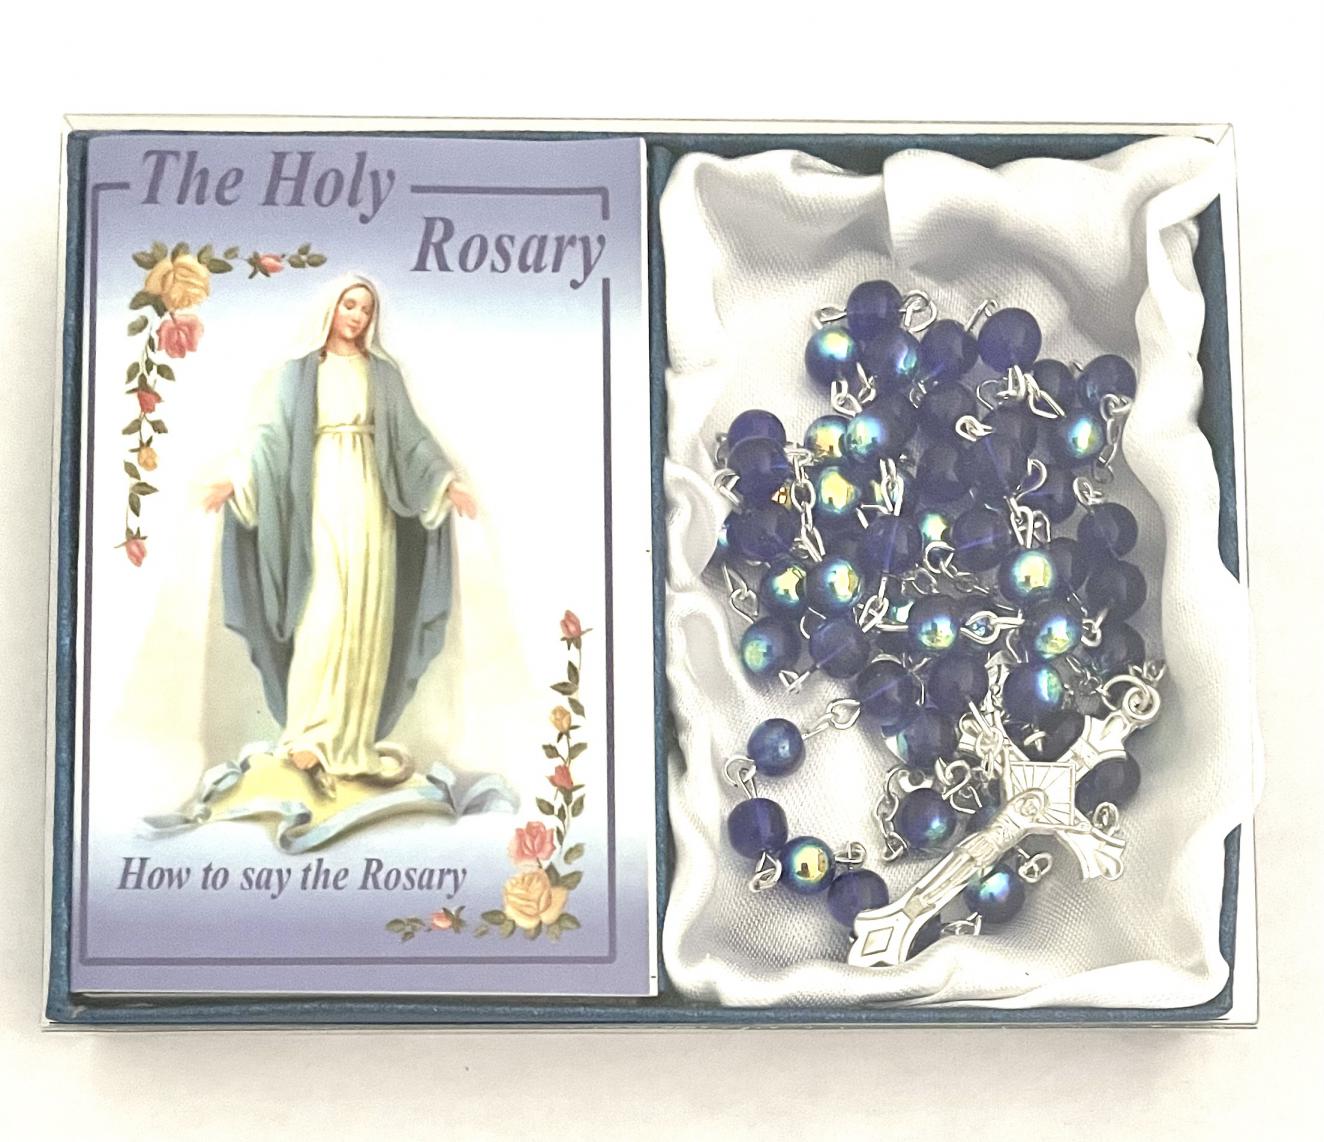 6mm Sapphire Rosary with How To Say The Rosary Booklet in Blue Box